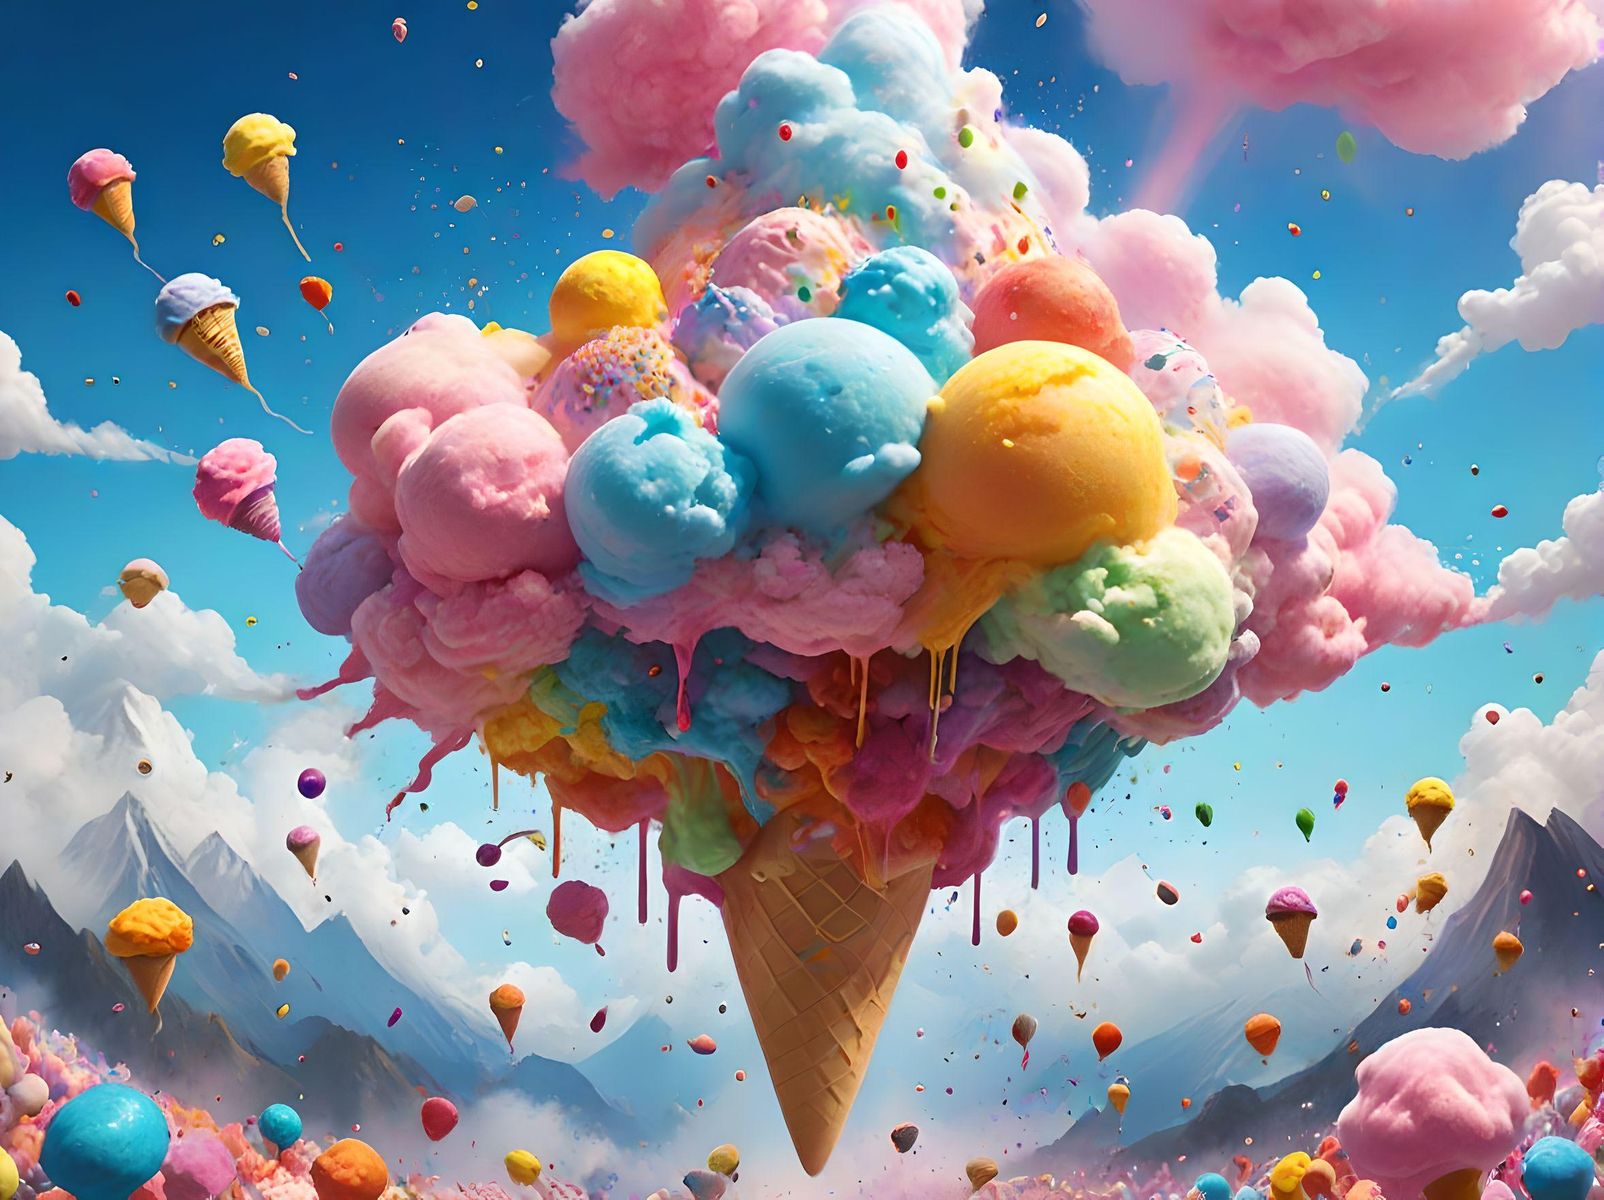 a volcano erupting streams of rainbow-colored ice cream into a cotton candy sky, while marshmallow clouds float overhead and a flock of flying jellybeans swarm around it like birds